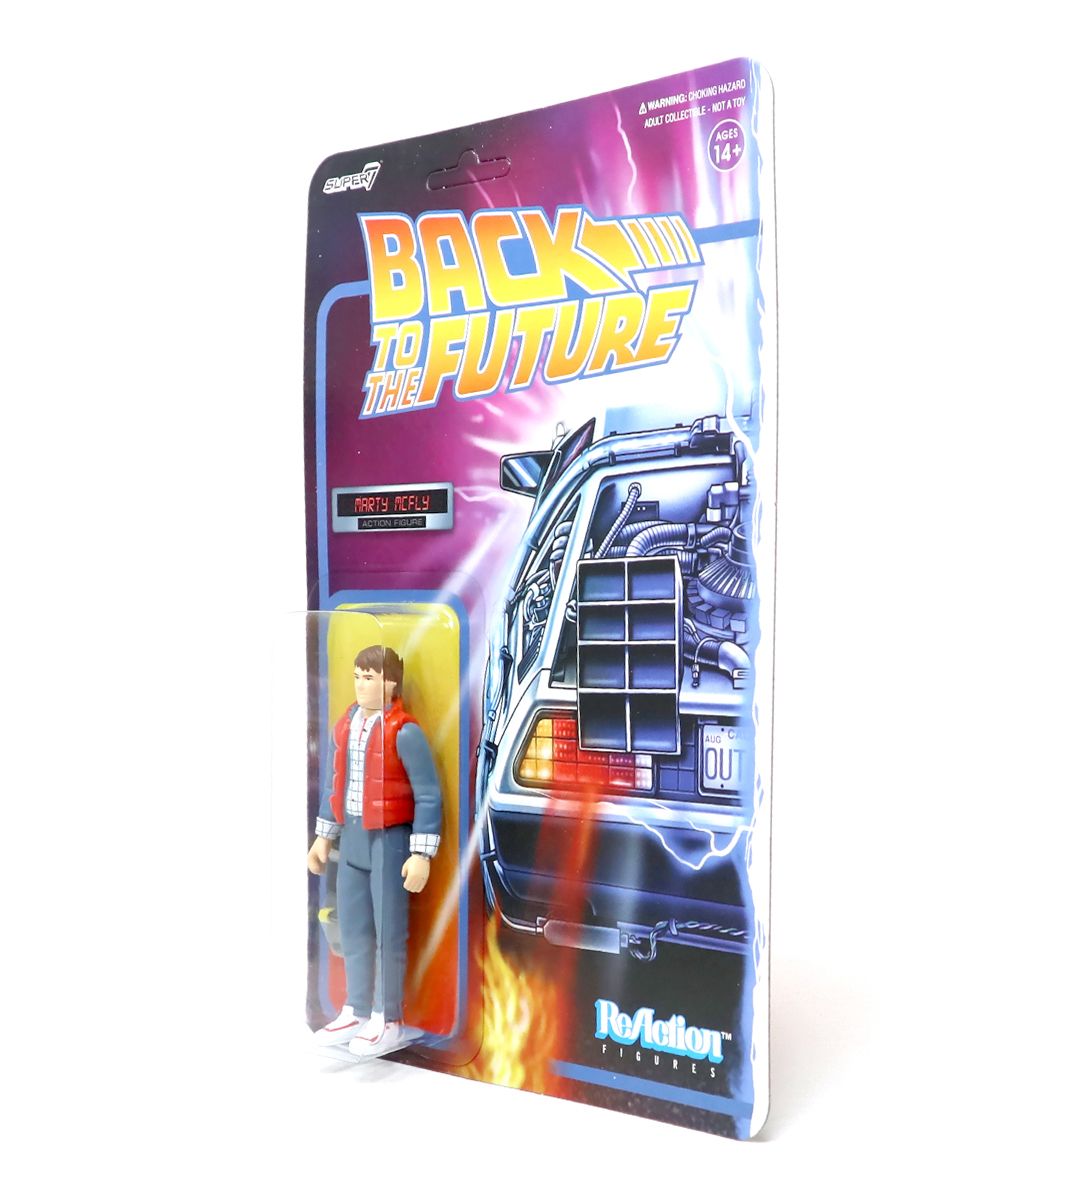 Marty McFly - BTTF - ReAction figure